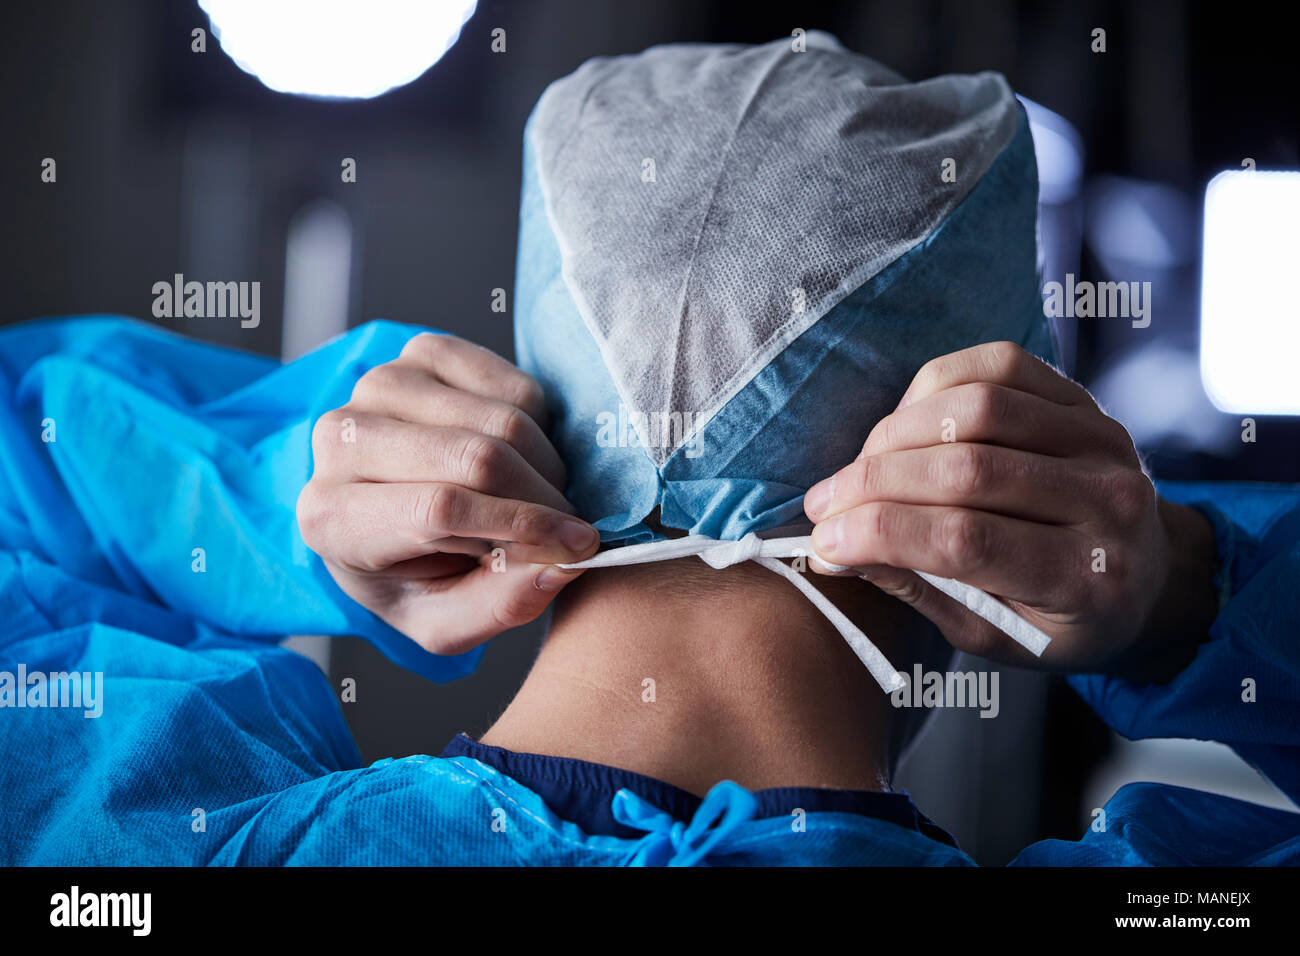 Surgeon tying surgical cap in preparation, back view Stock Photo